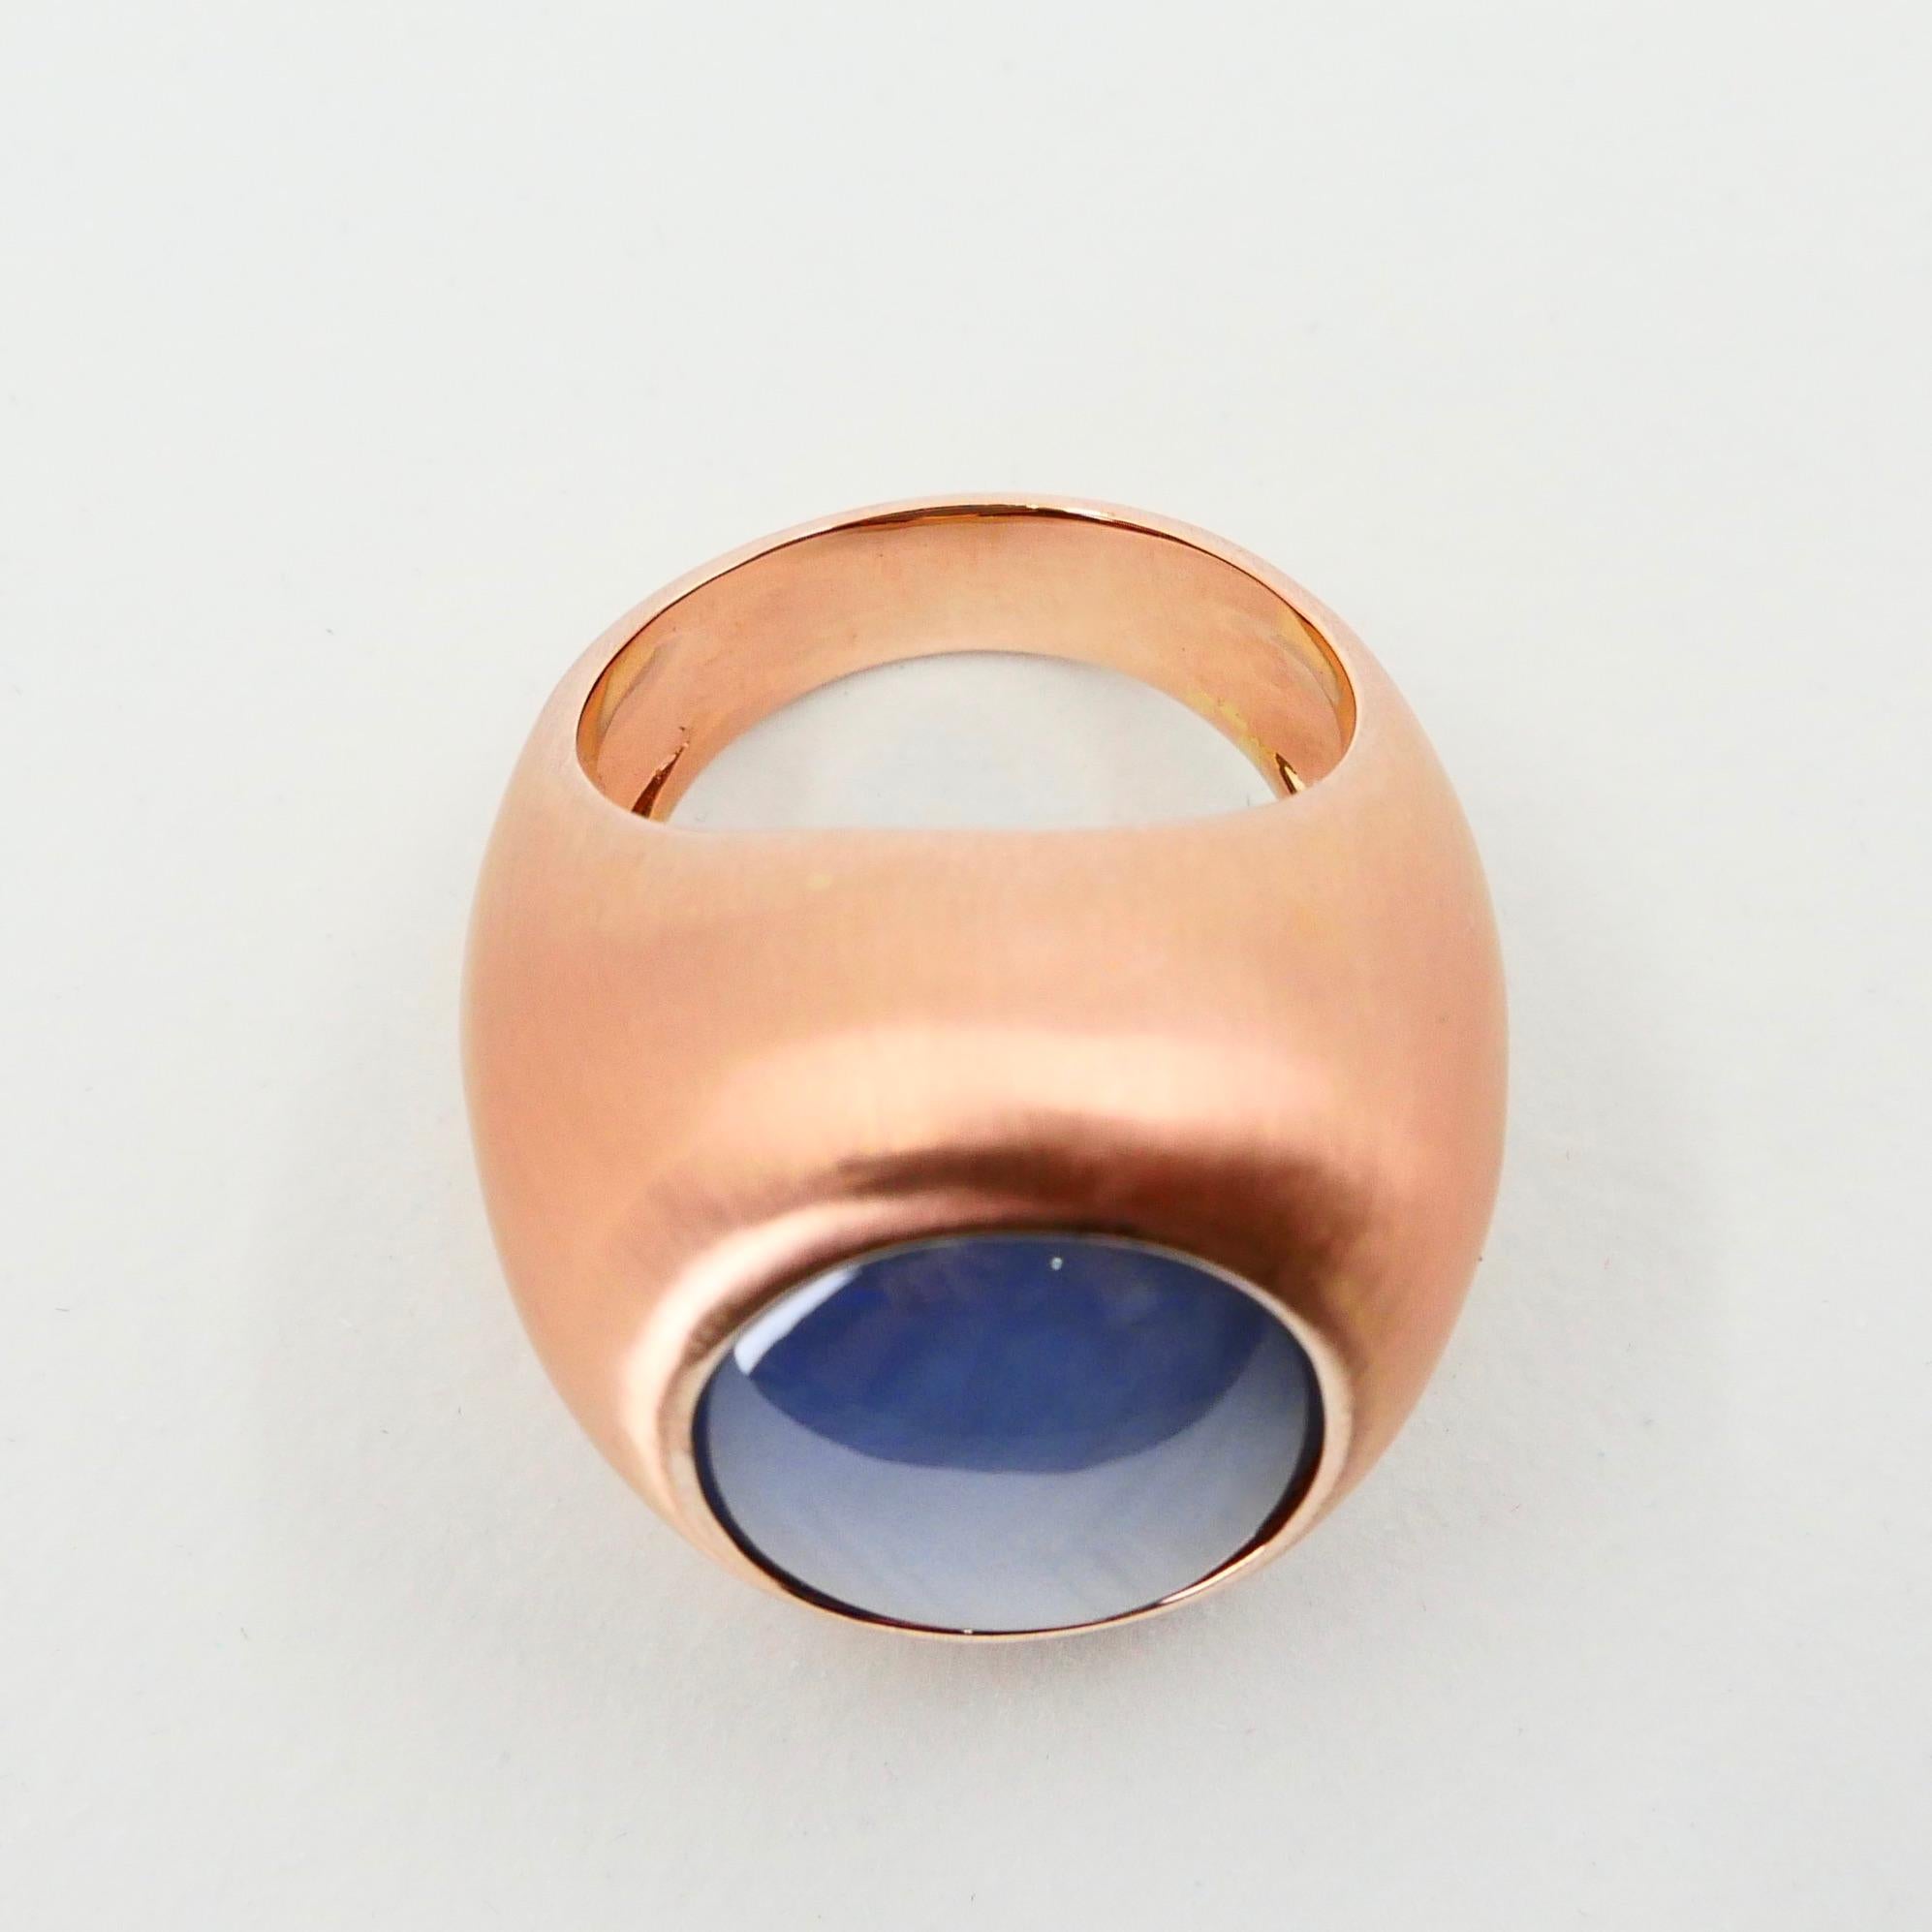 Certified Blue Star Sapphire 39.28 Carat Rose Gold Ring, Unisex, Strong Star 11